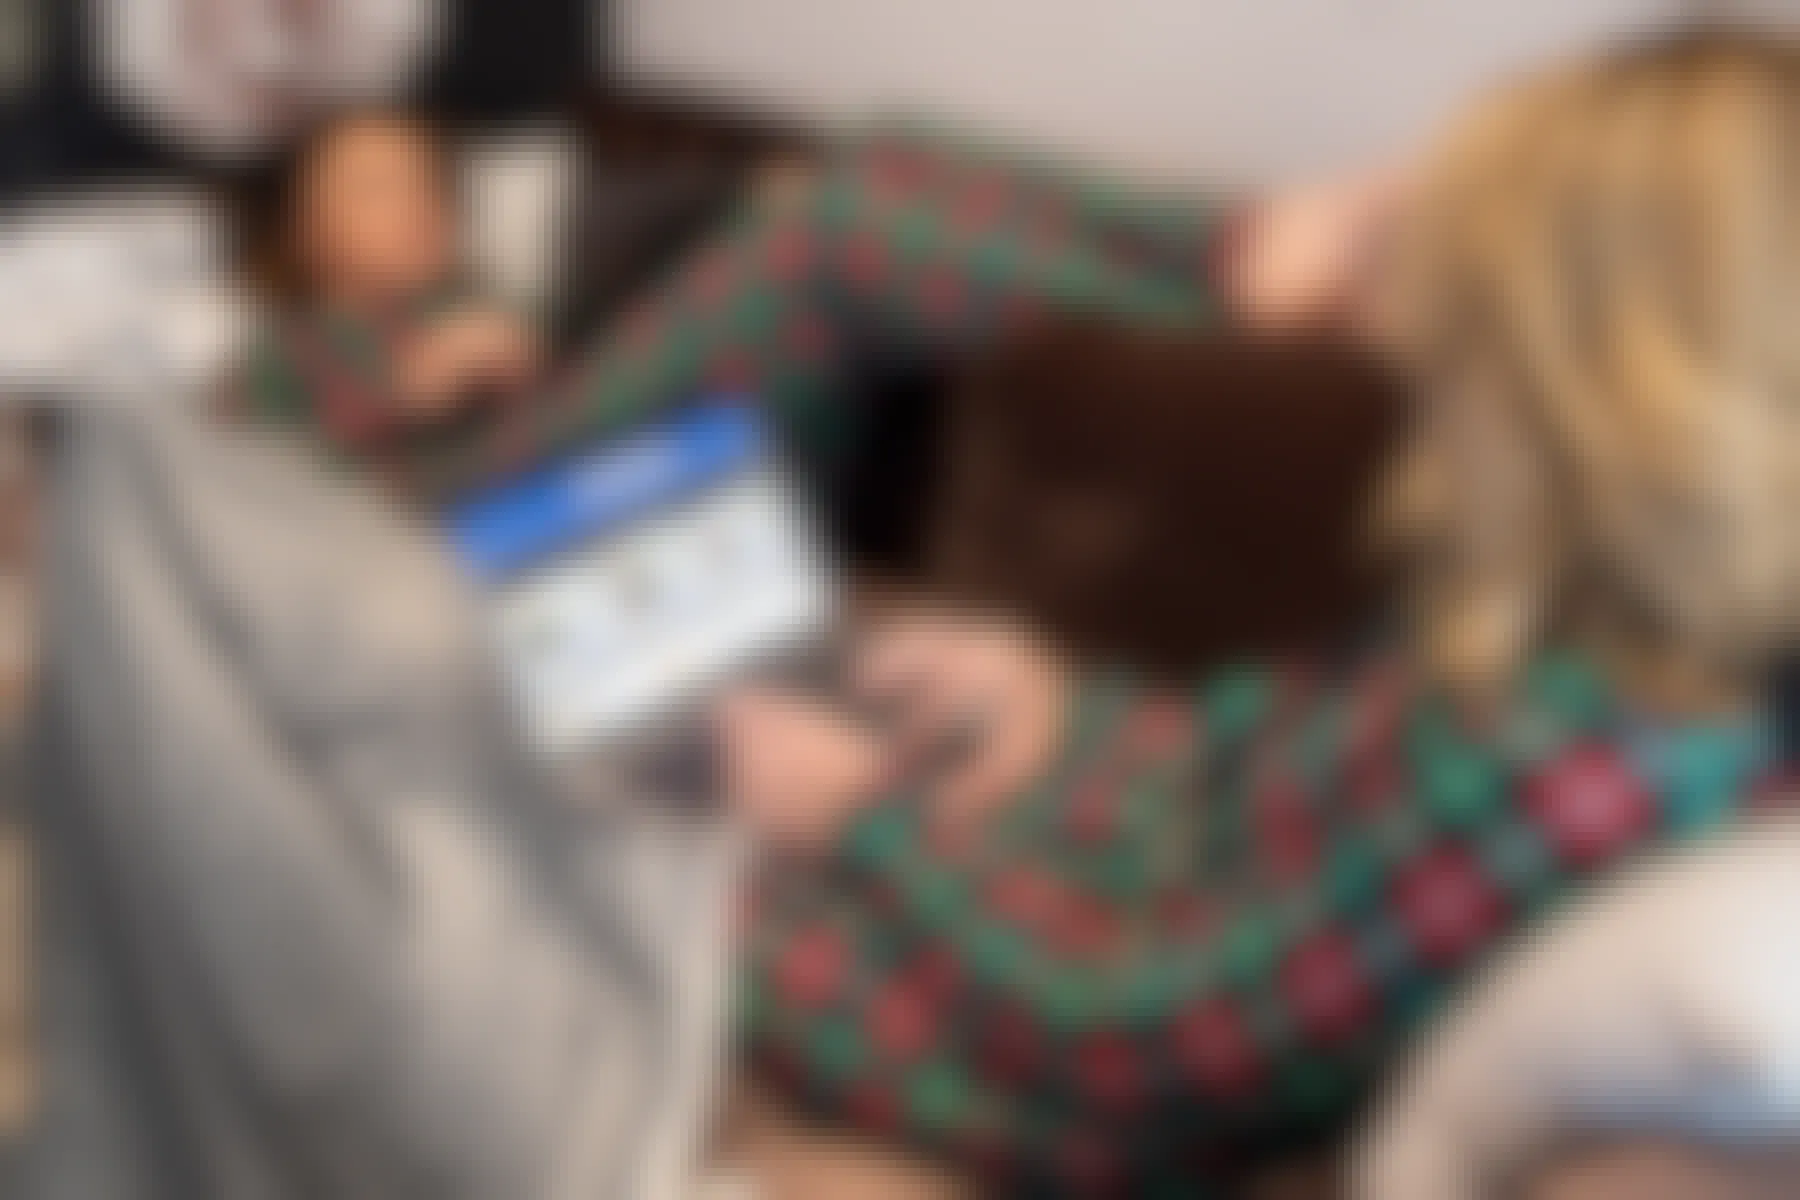 Two people sitting on a couch together, each looking at their laptops, one of their screens facing forward displaying the Walmart.com deals for laptops